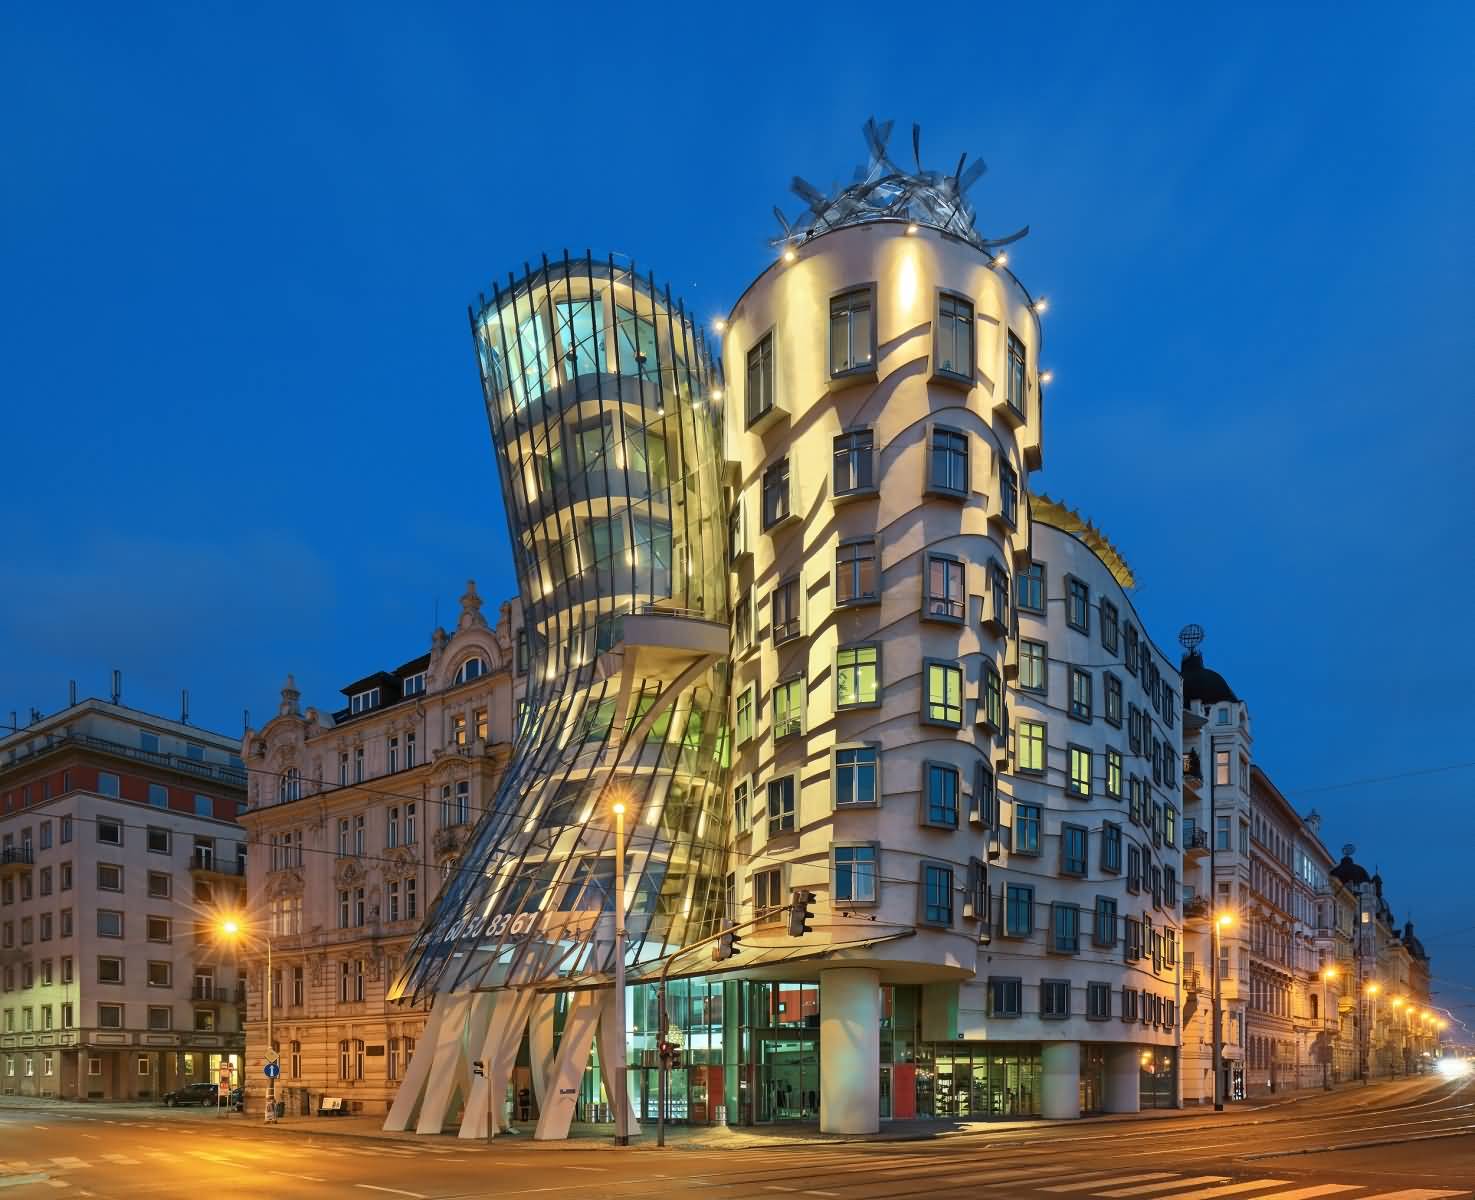 The Dancing House Lit Up At Night